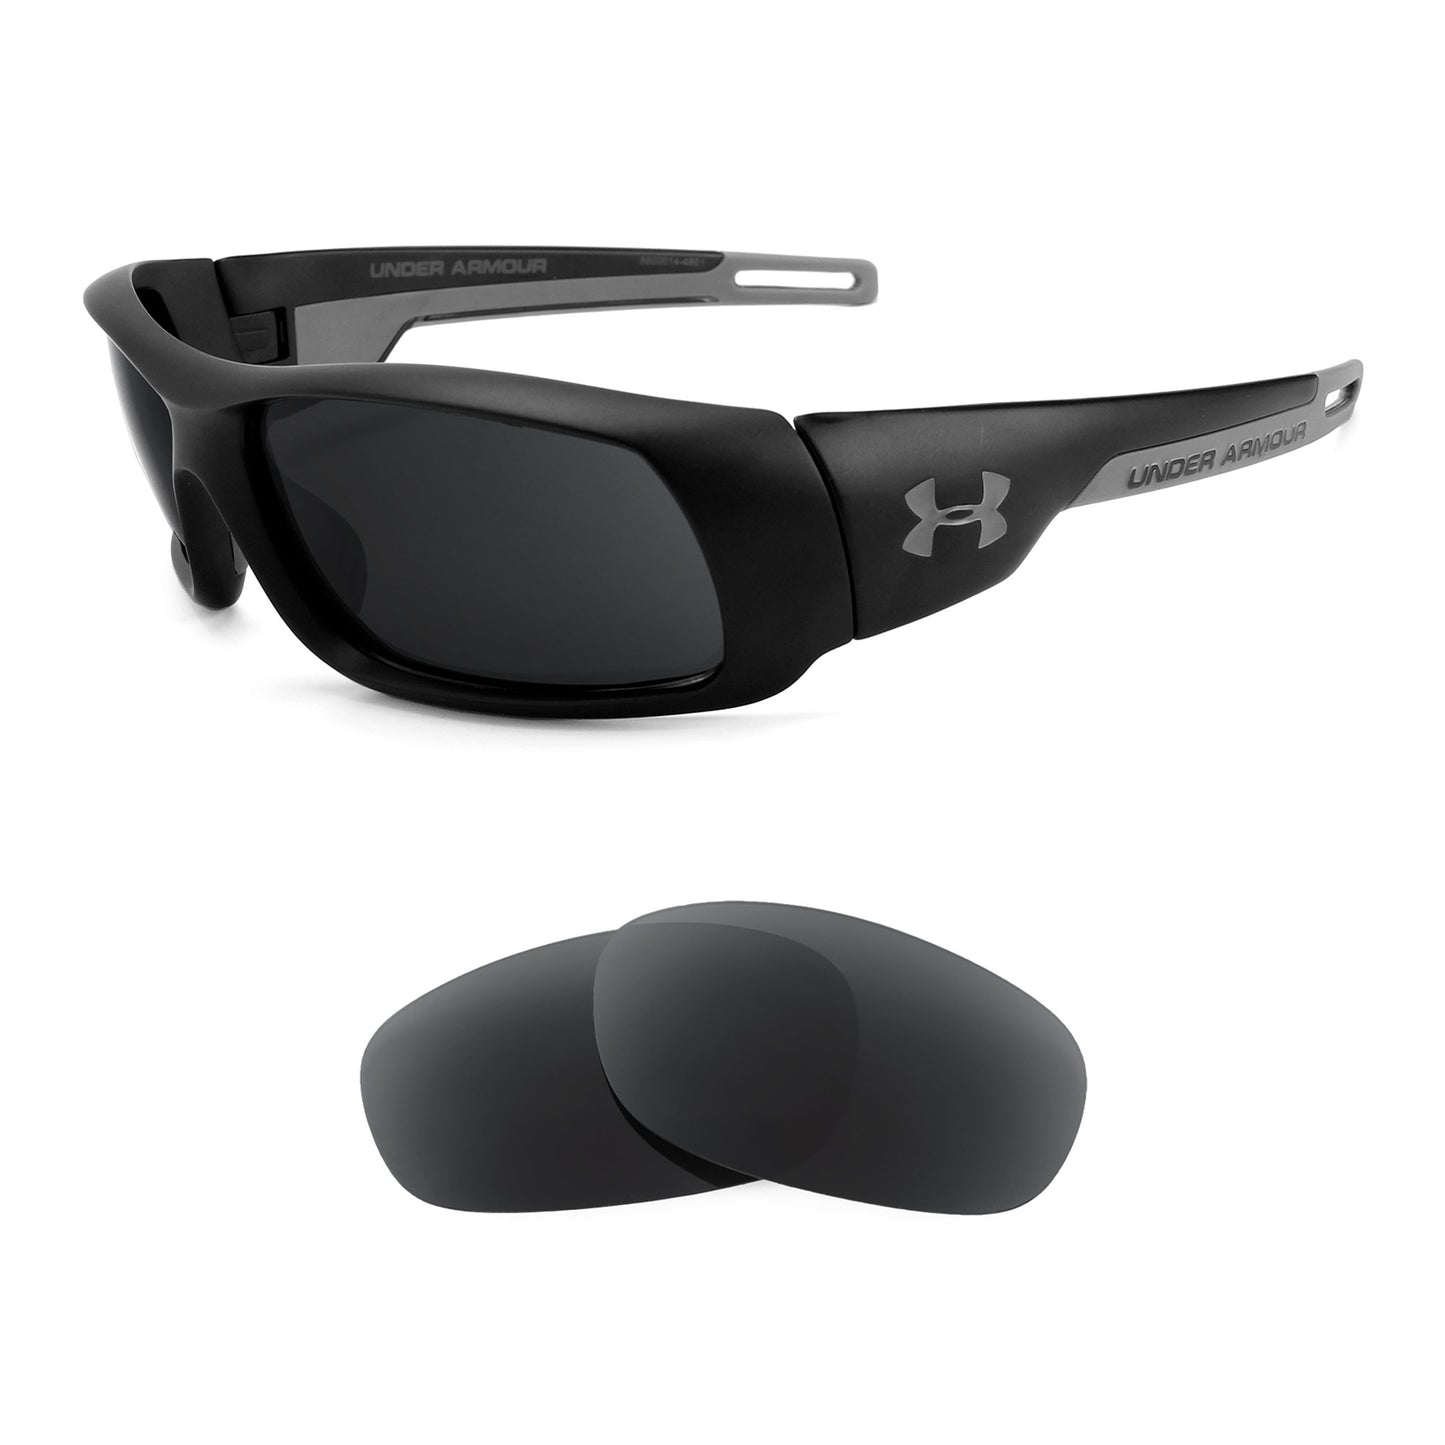 Under Armour Hammer sunglasses with replacement lenses